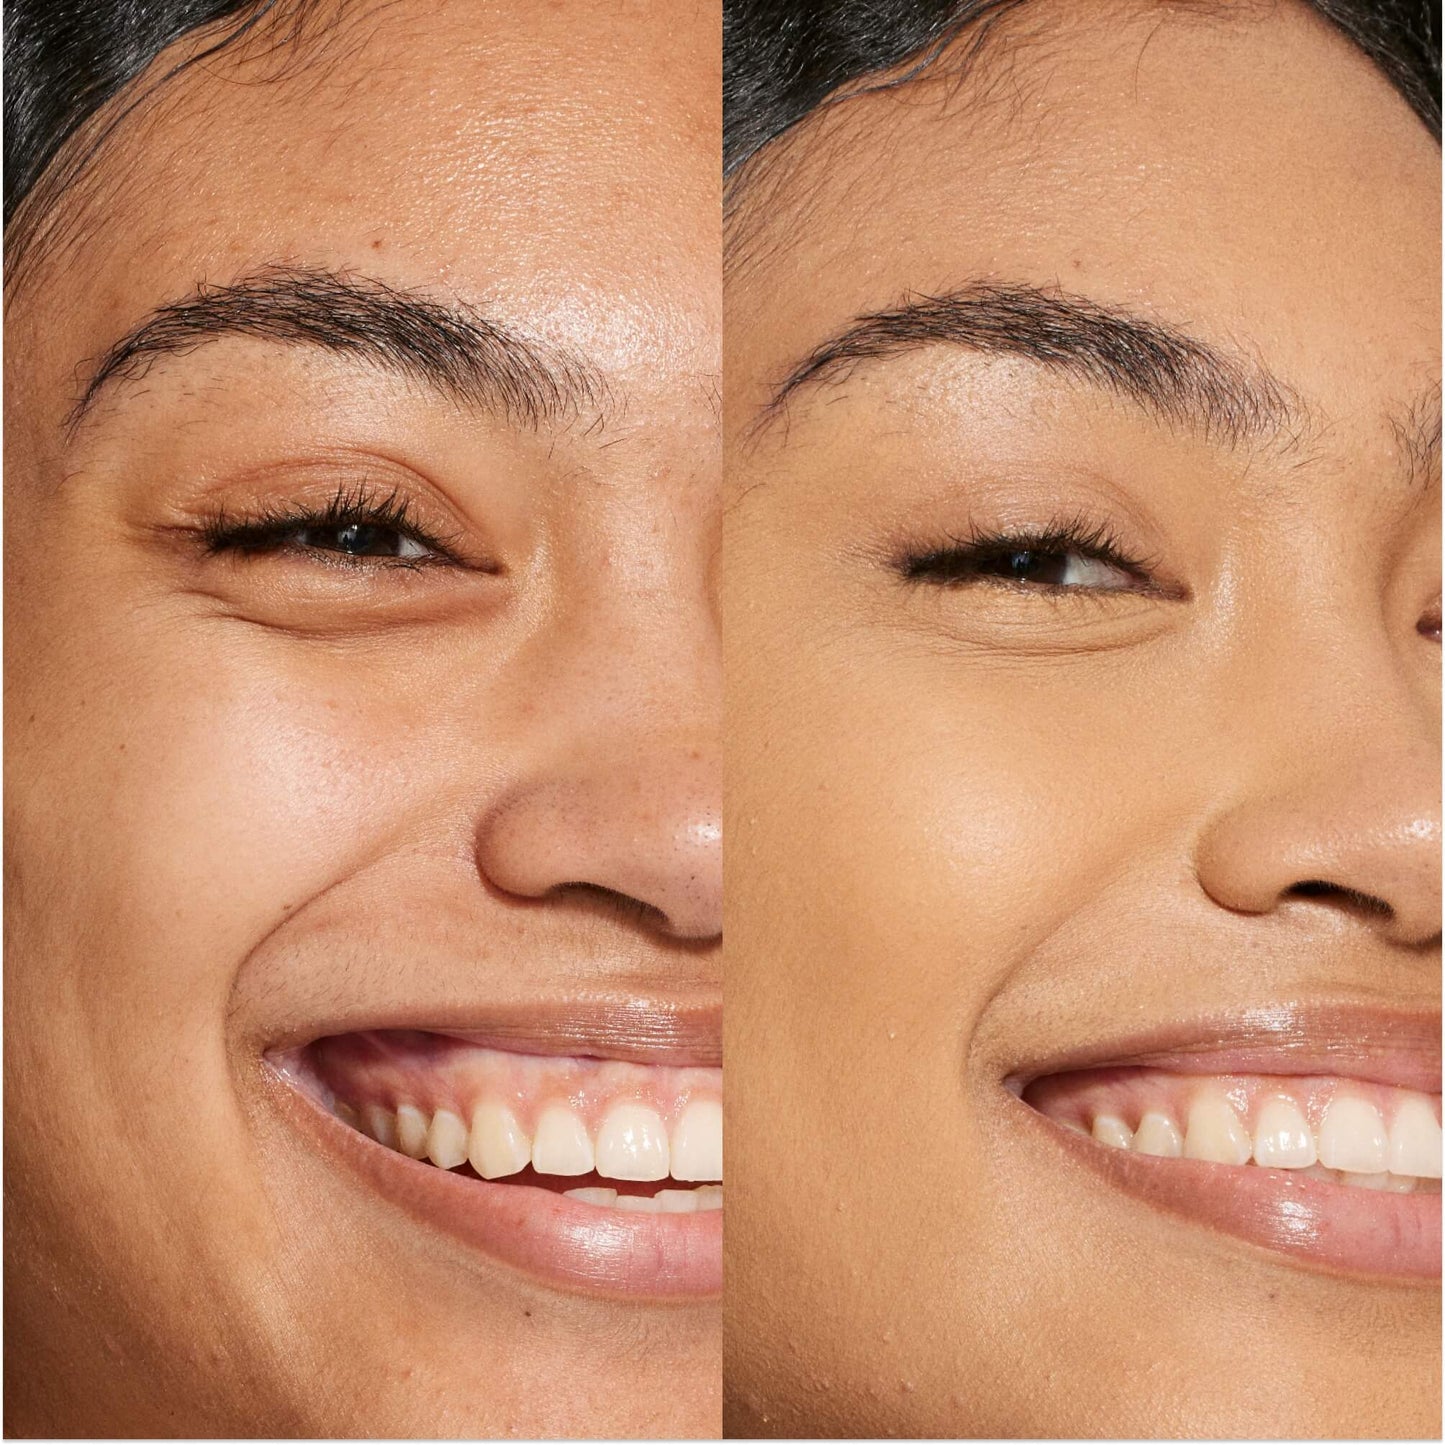 11.0 OC [A person's face before and after using Tower 28 Beauty's Swipe Serum Concealer in shade 11.0 OC to cover up dark circles, blemishes, and discoloration]